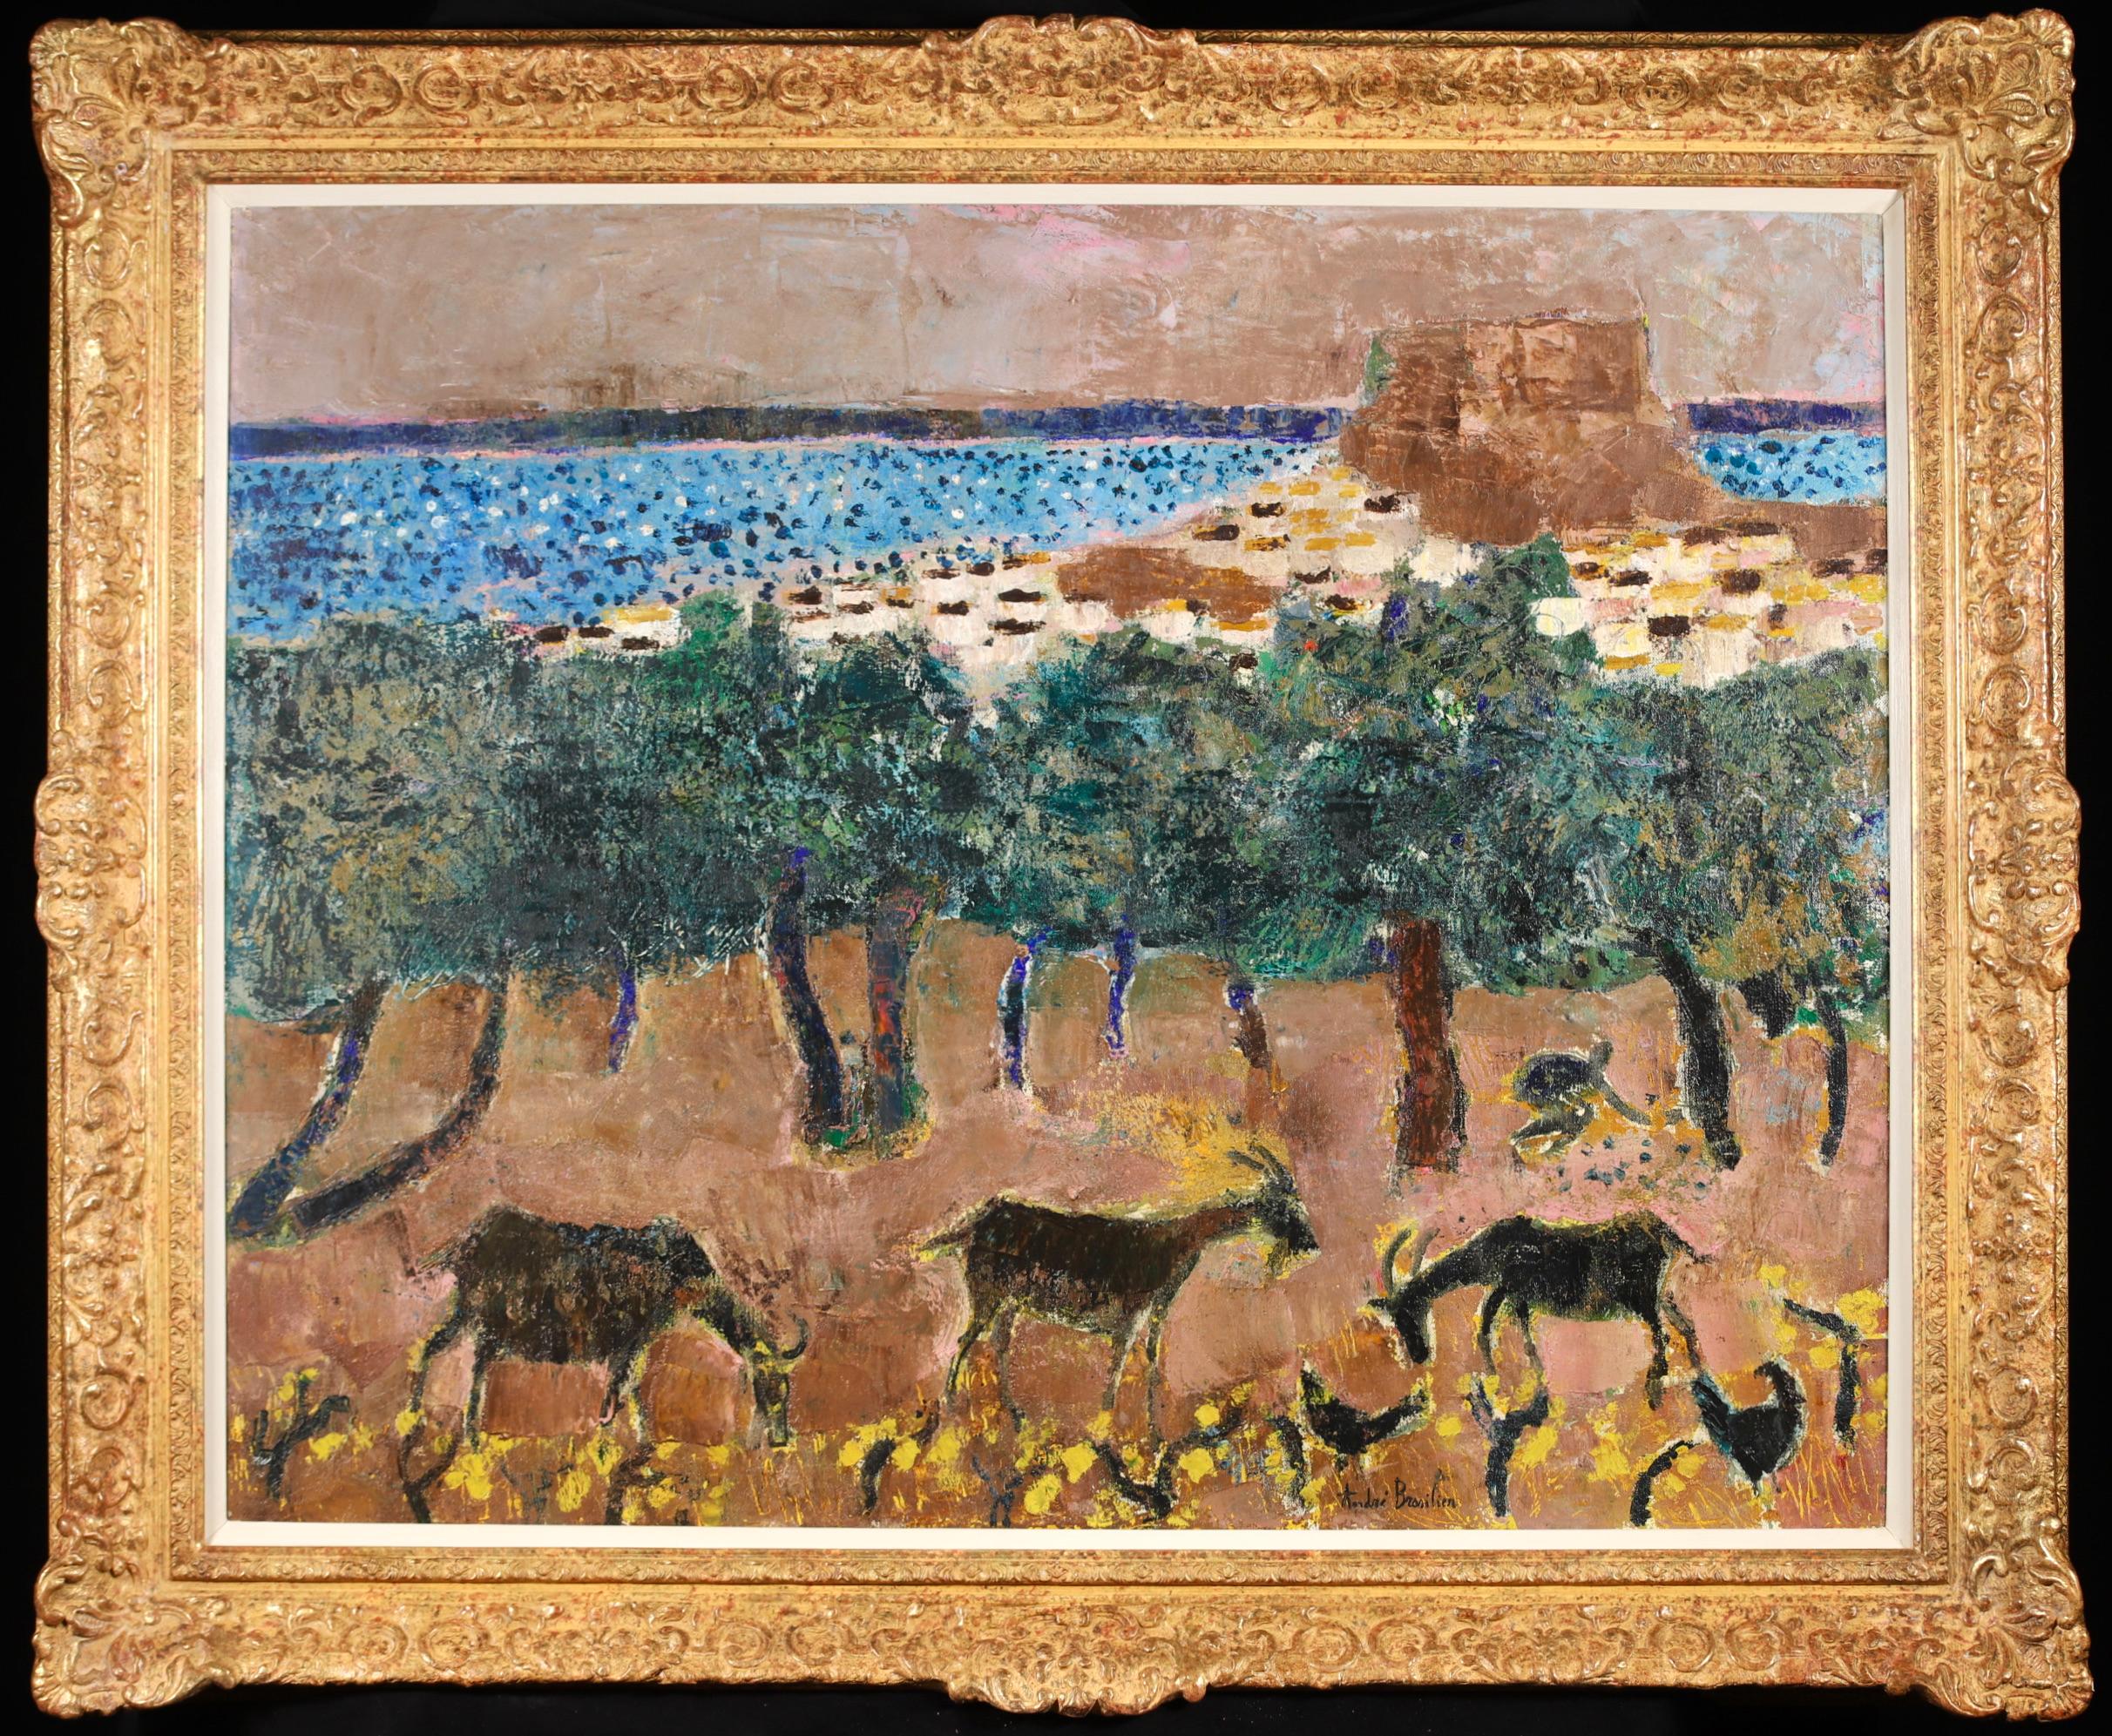 Signed oil on canvas animals in landscape by French expressionist painter Andre Brasilier. The piece depicts goats and birds in front of green trees with a blue sea beyond. This early work was painted by Brasilier when on a painting holiday on the